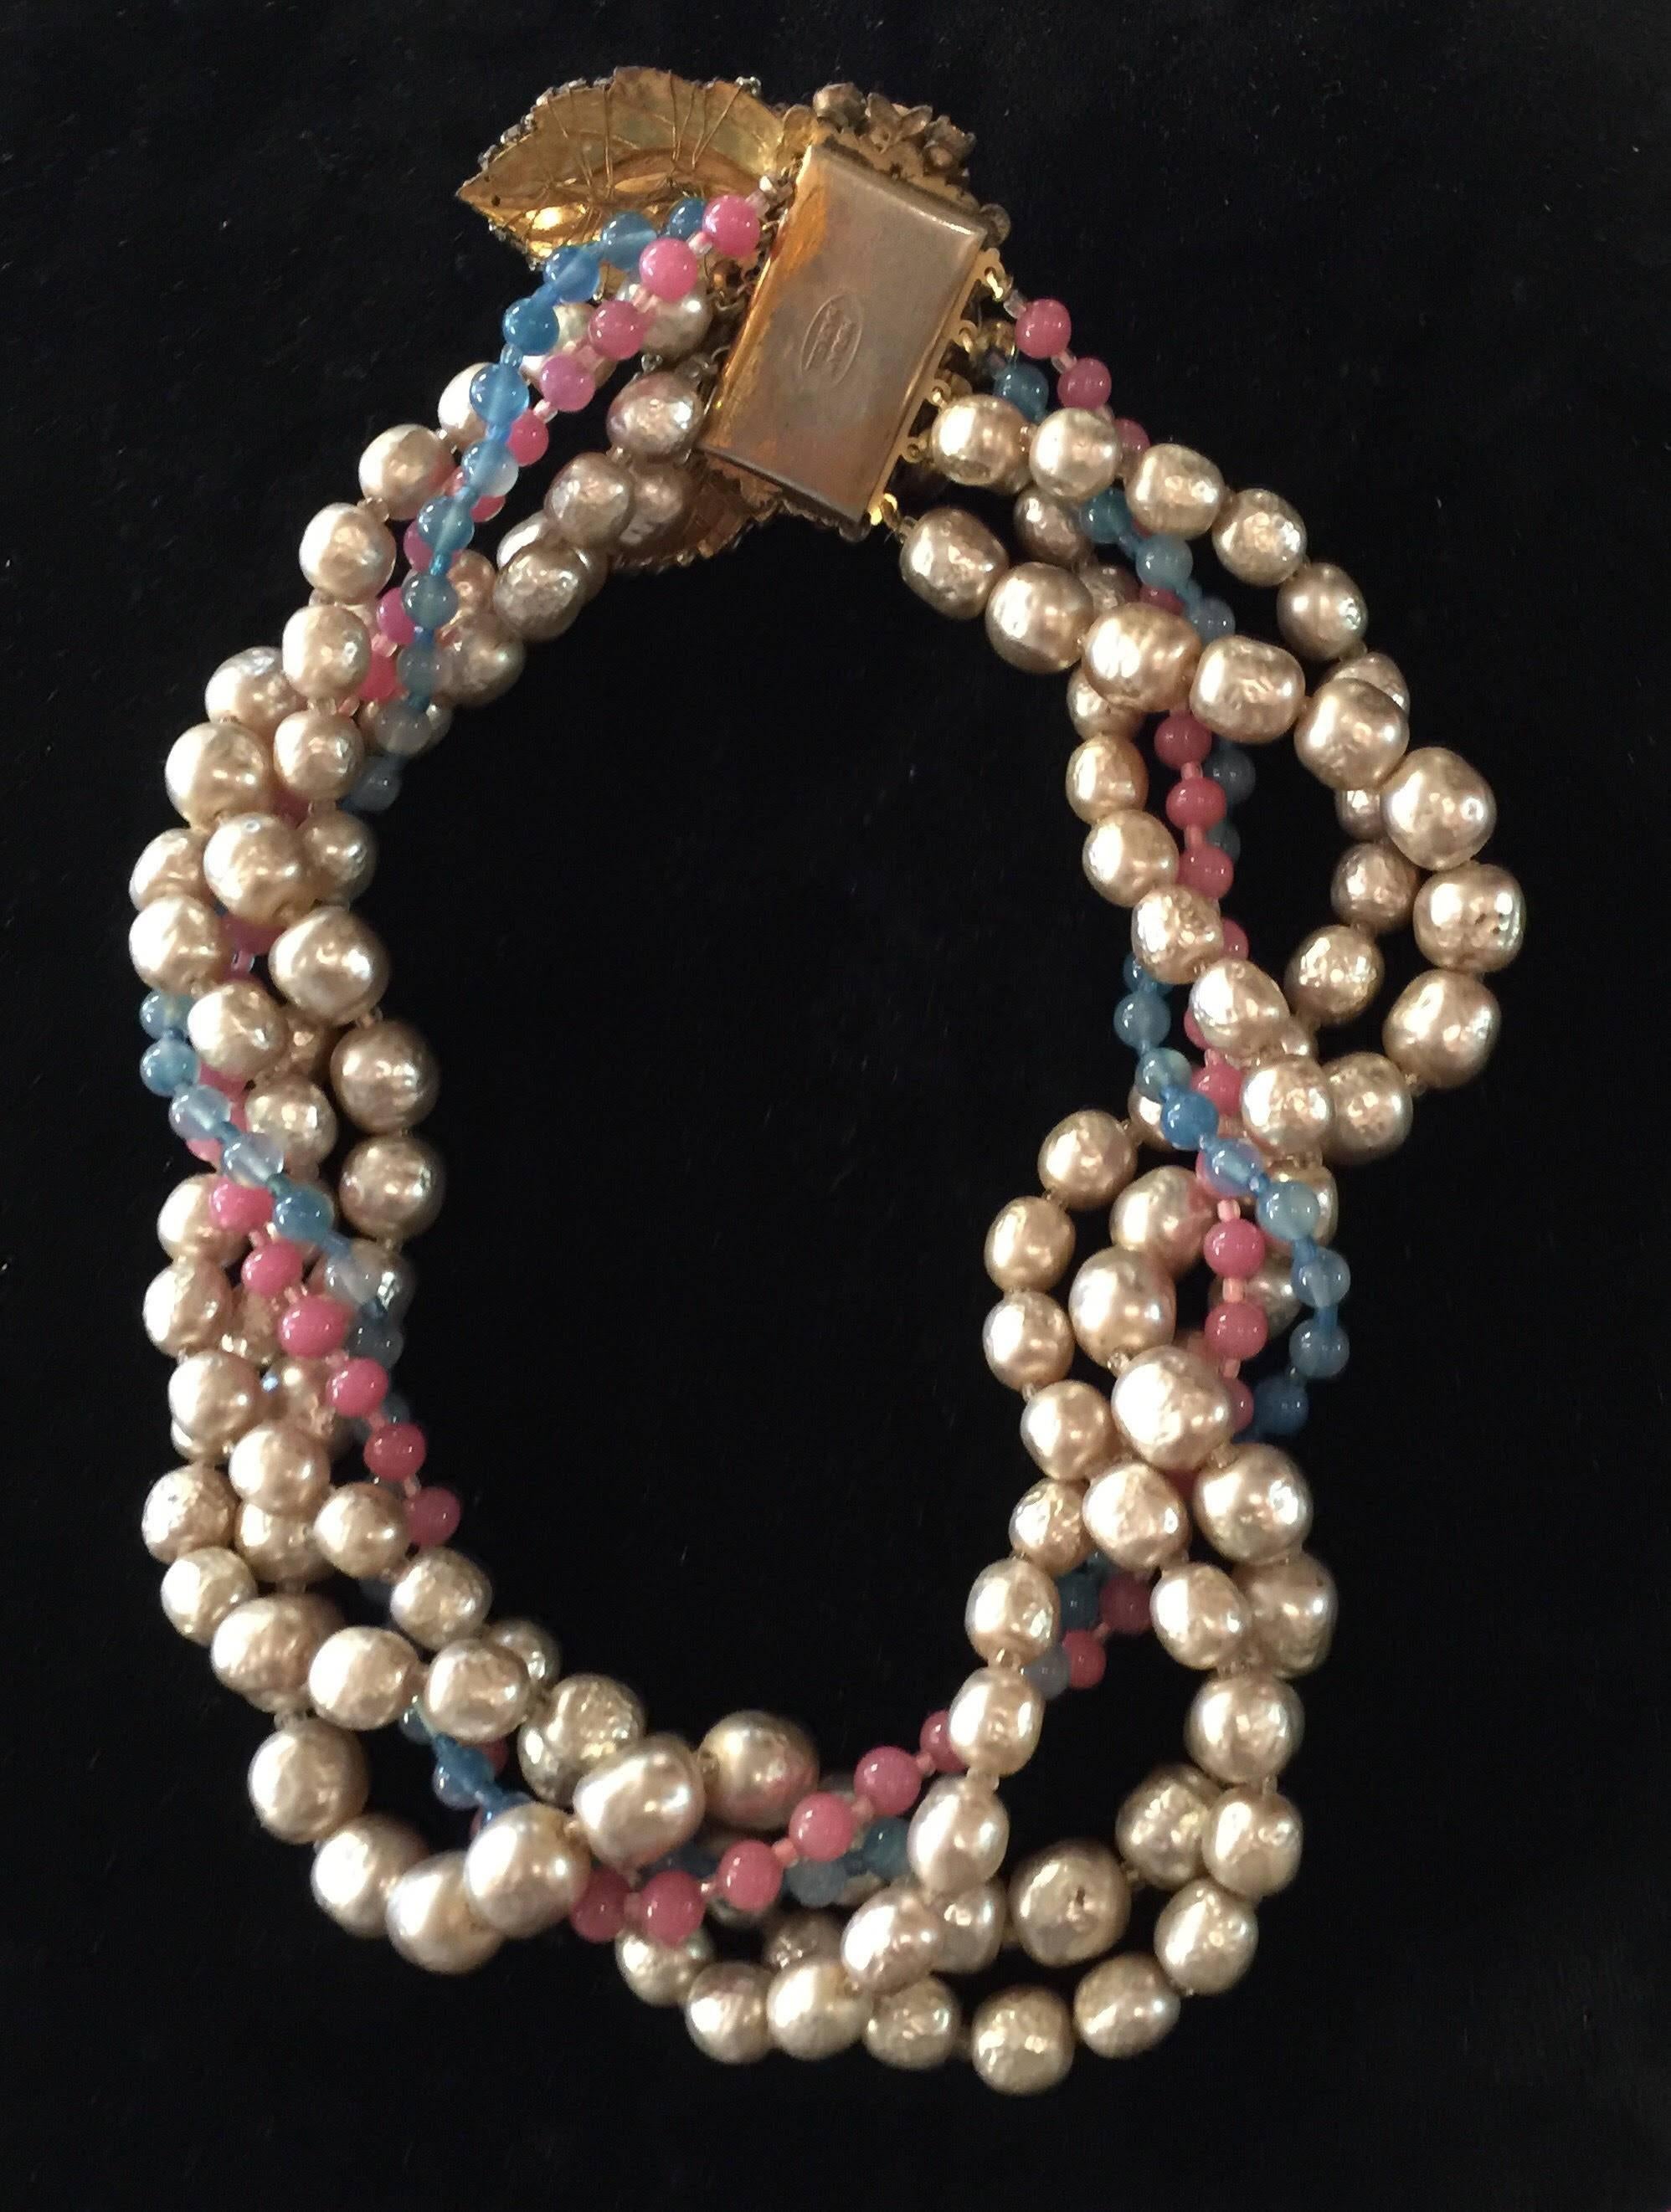 This luscious multistrand necklace by Miriam Haskell is the quintessence of Haskell workmanship, tone and style. A twisted rope necklace or tourcade, it can also be worn loosely, rather than twisted. An ultra elaborate seed pearl and montee clasp